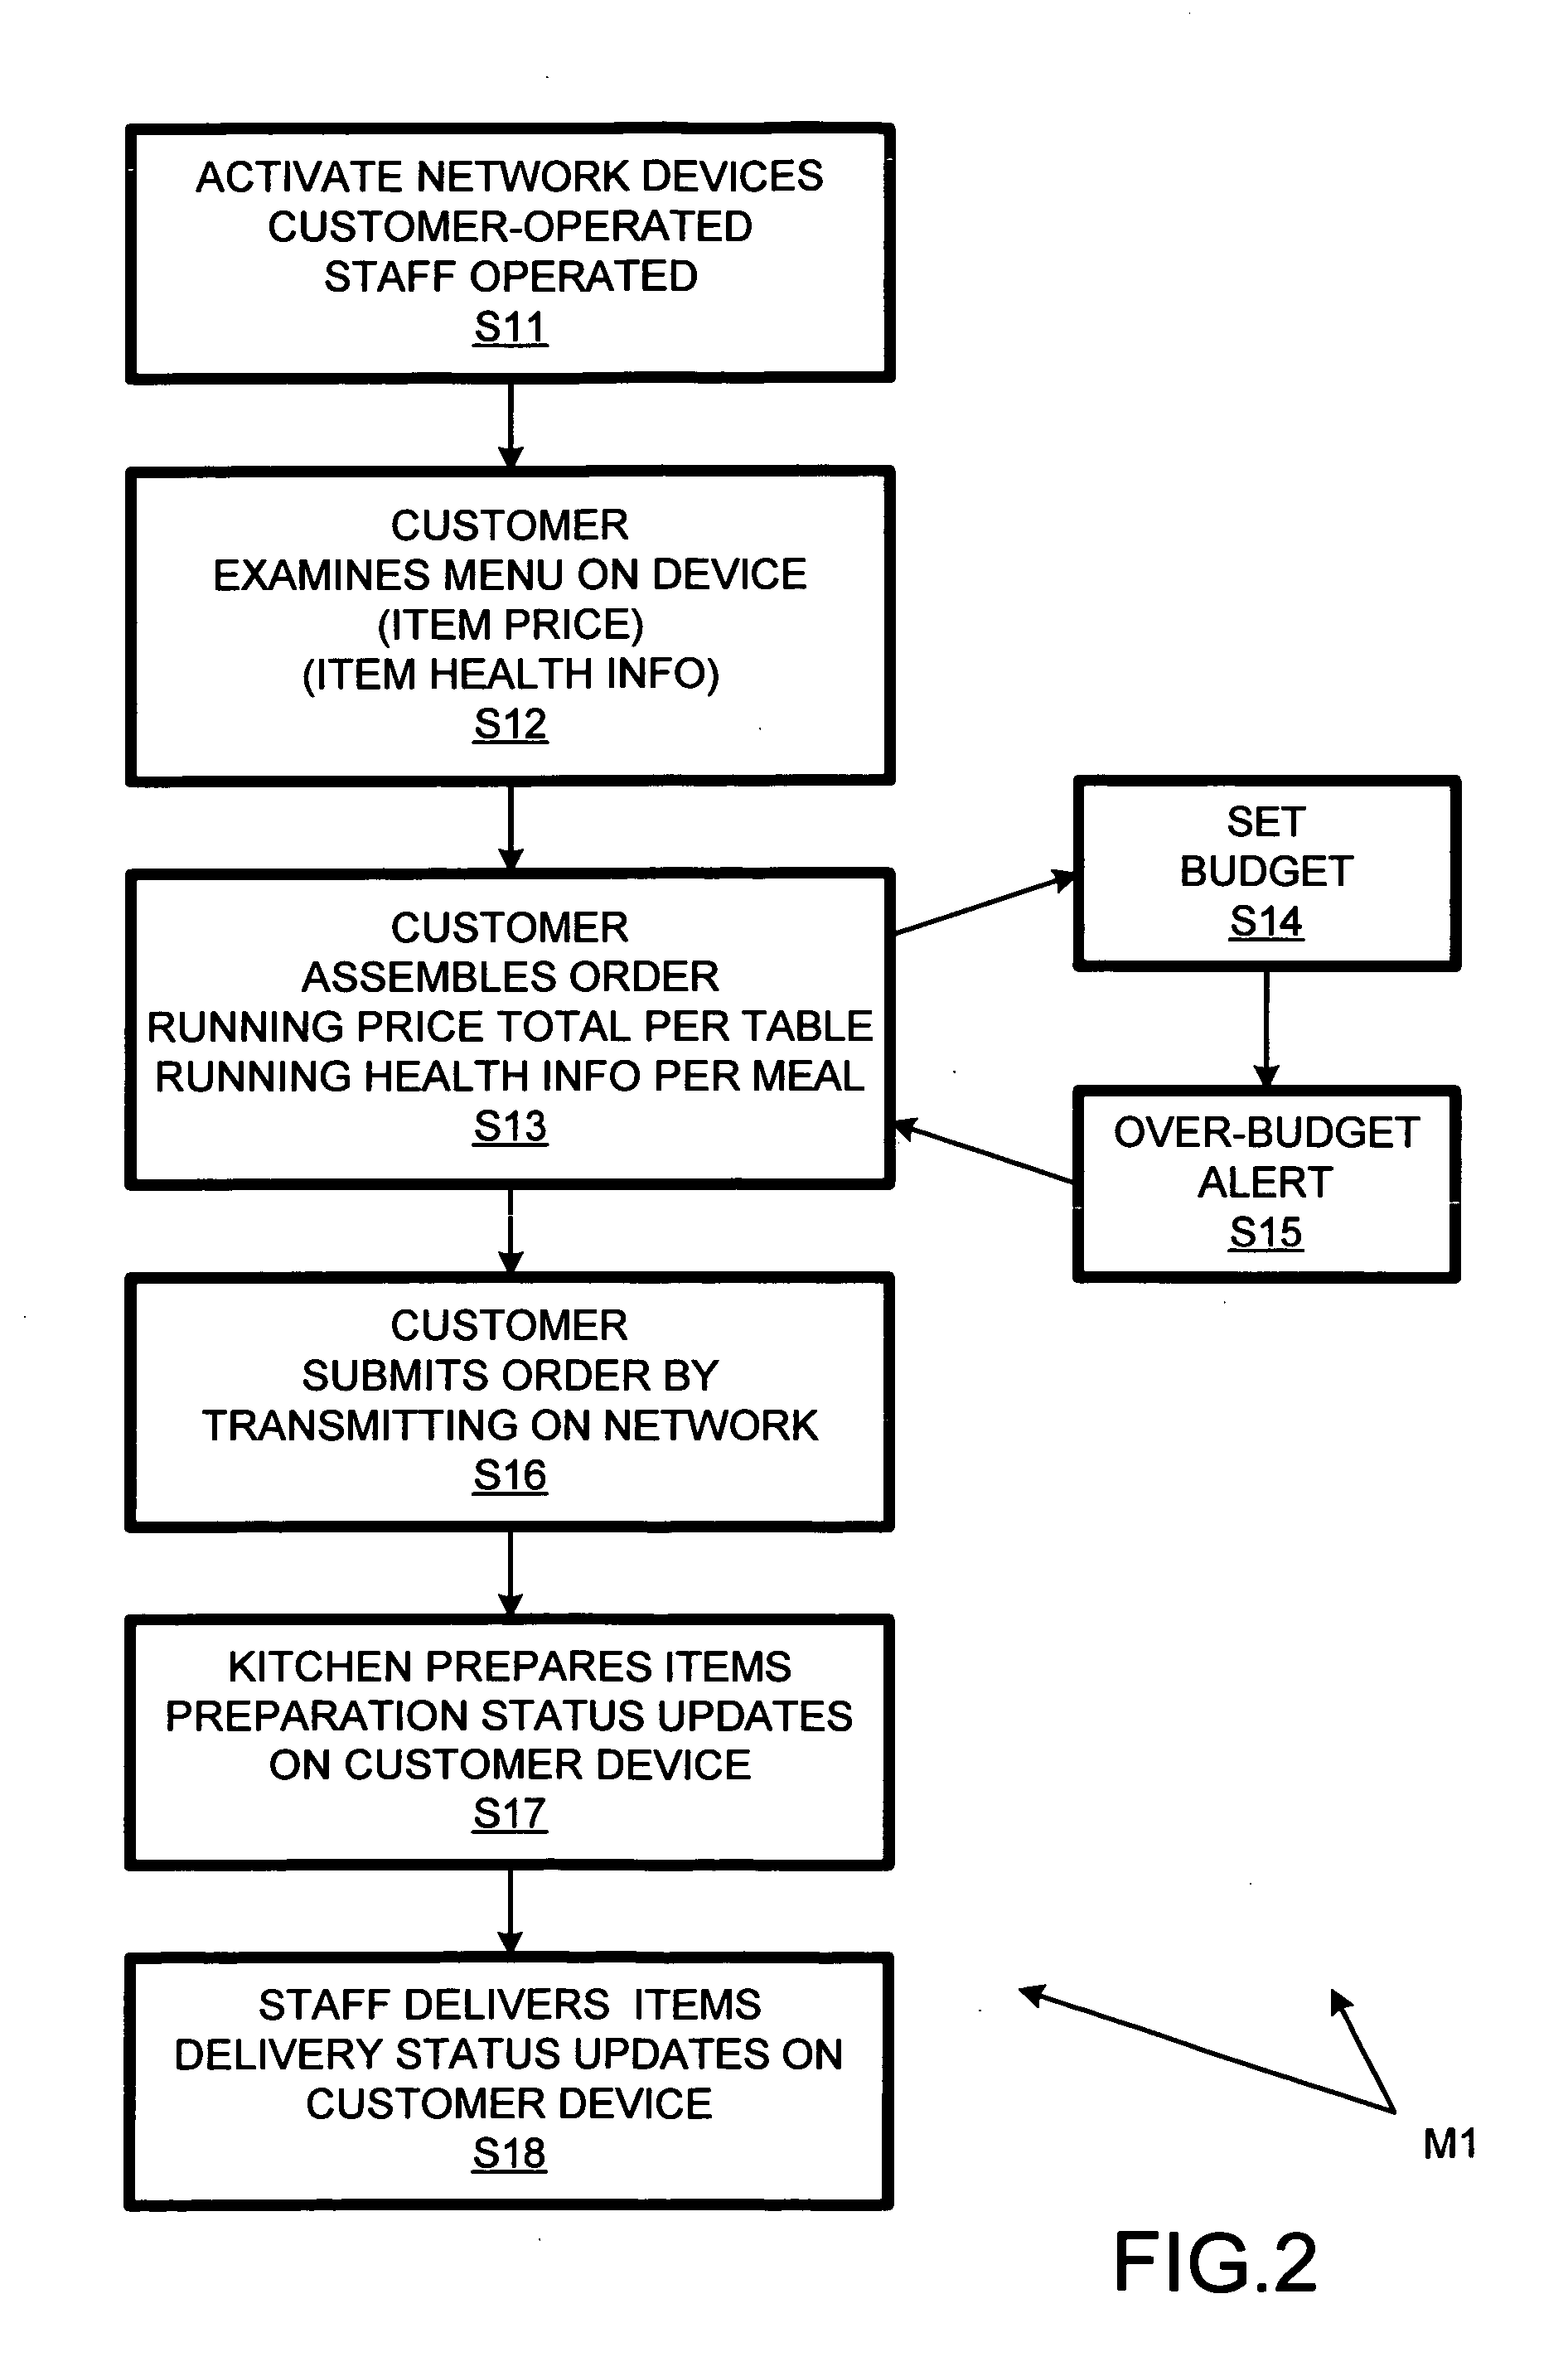 Restaurant management using network with customer-operated computing devices